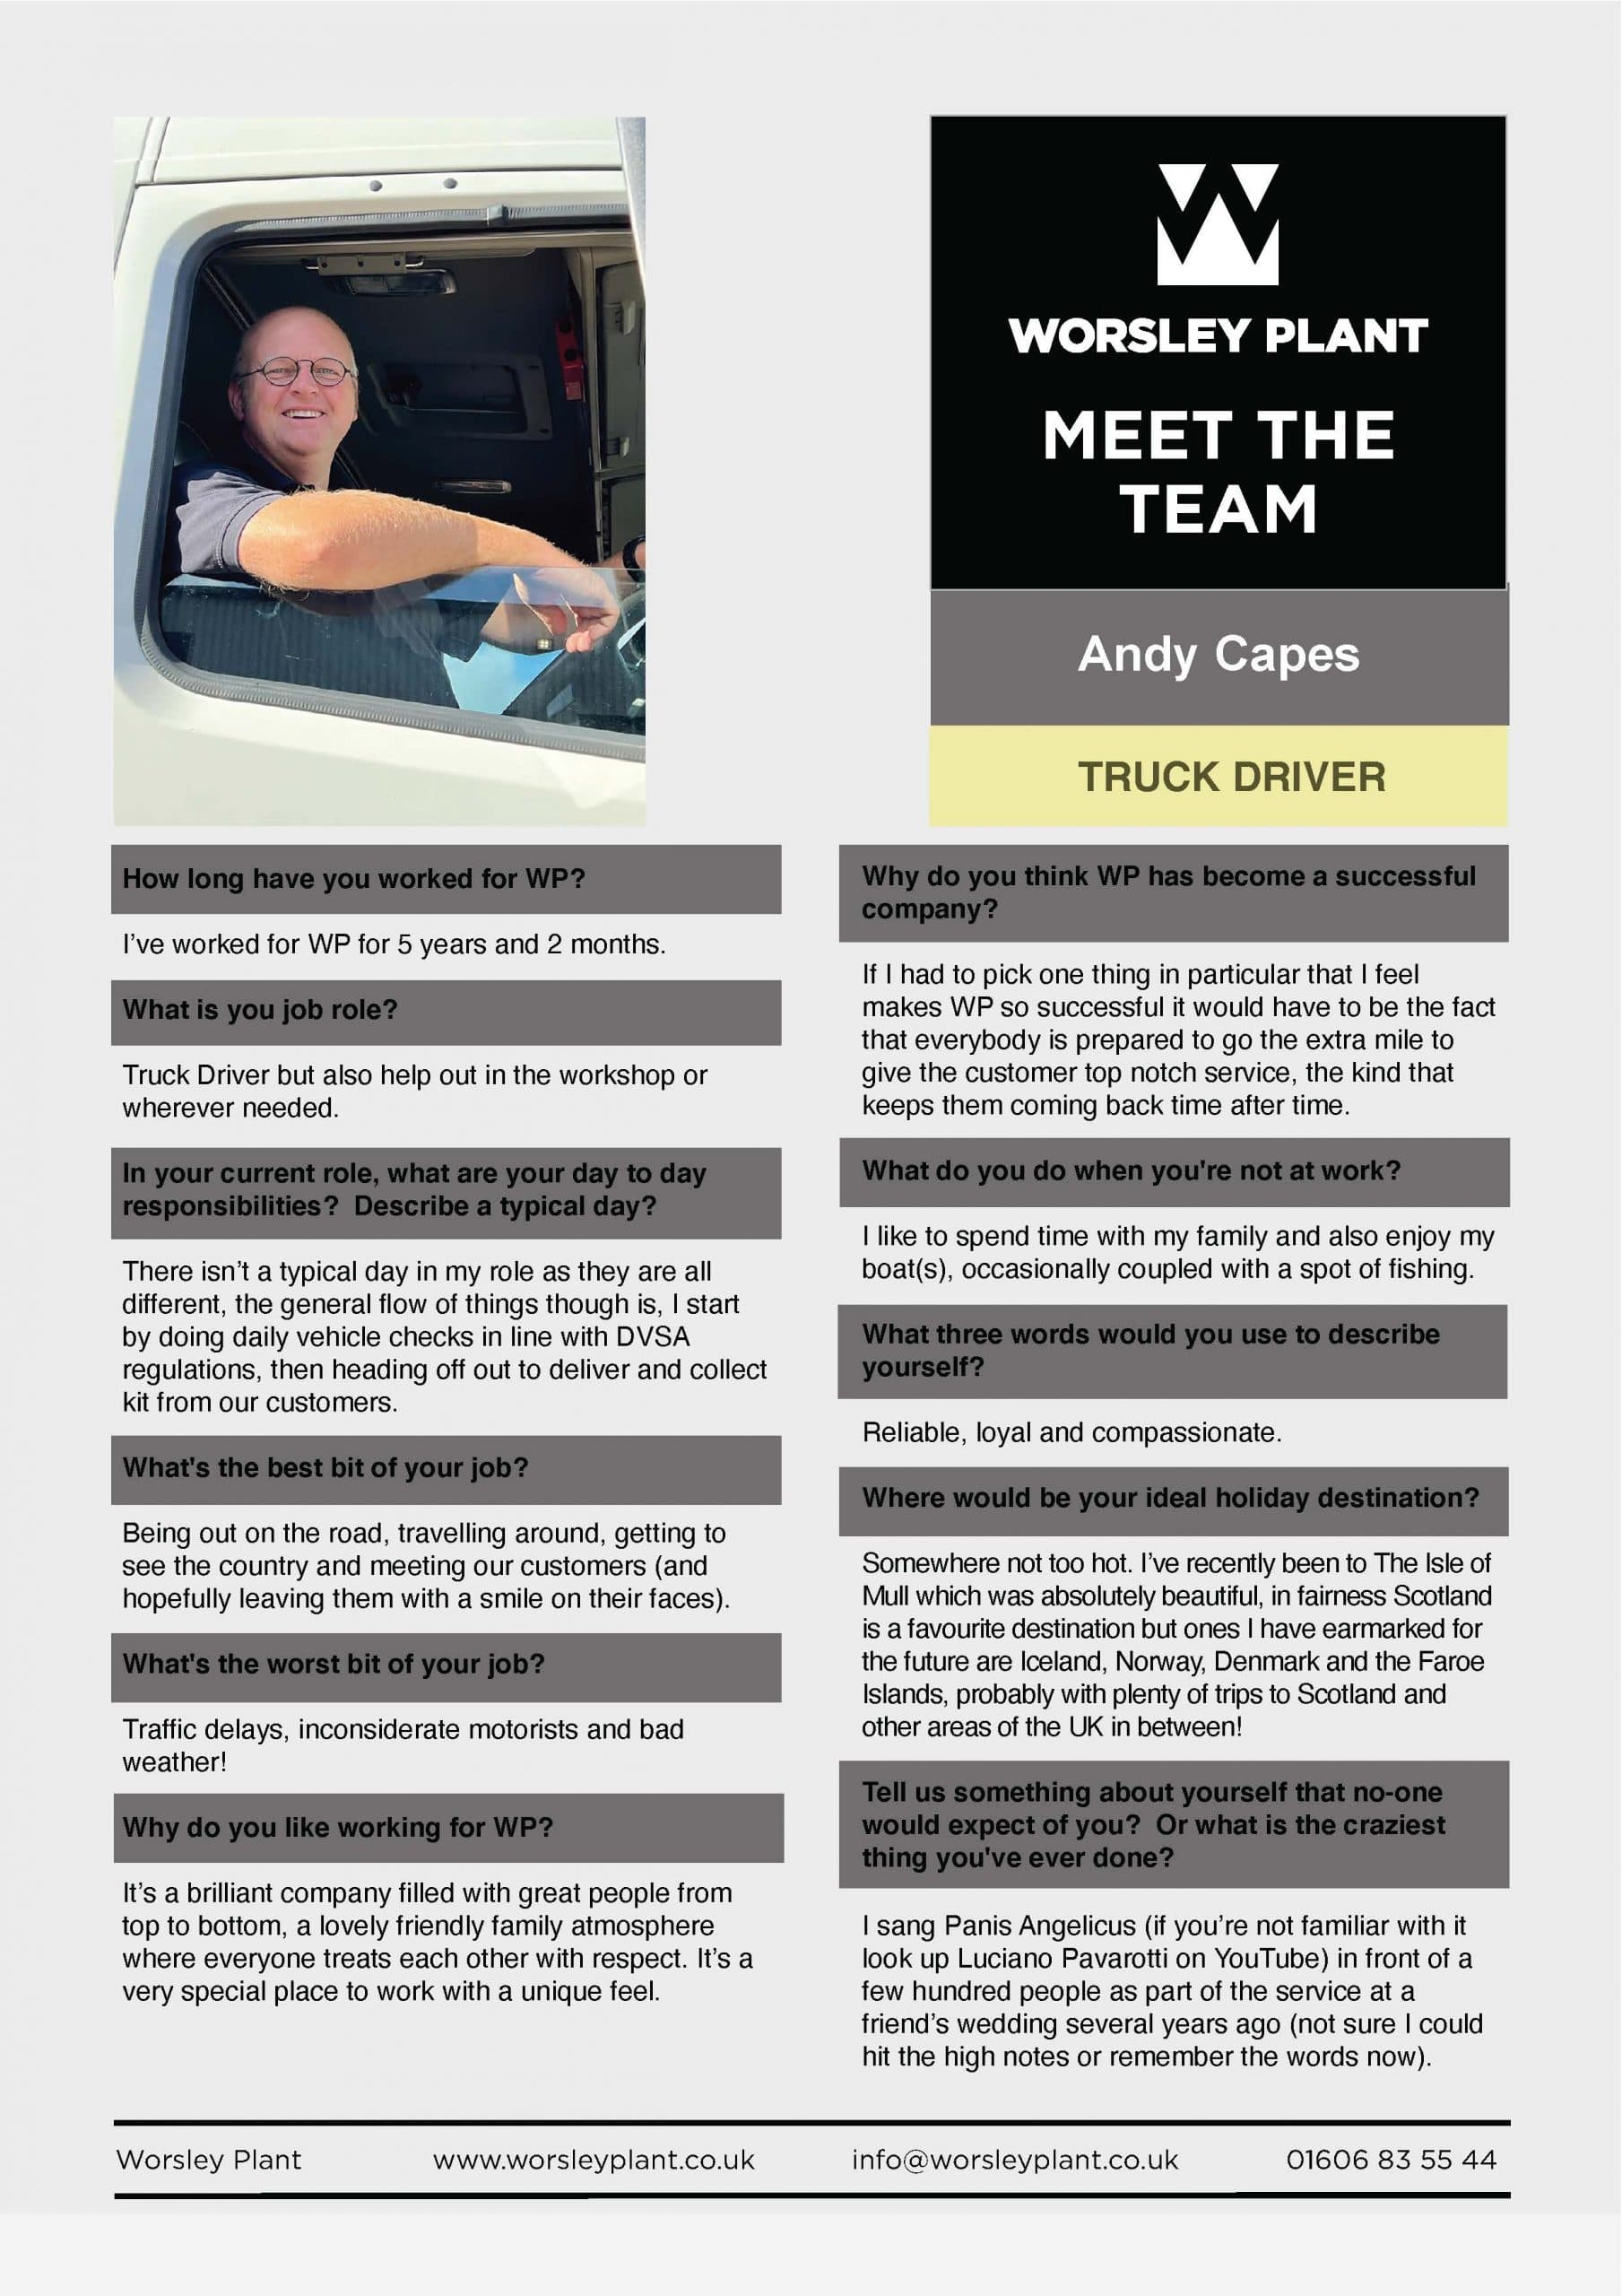 Meet the Team - Andy Capes